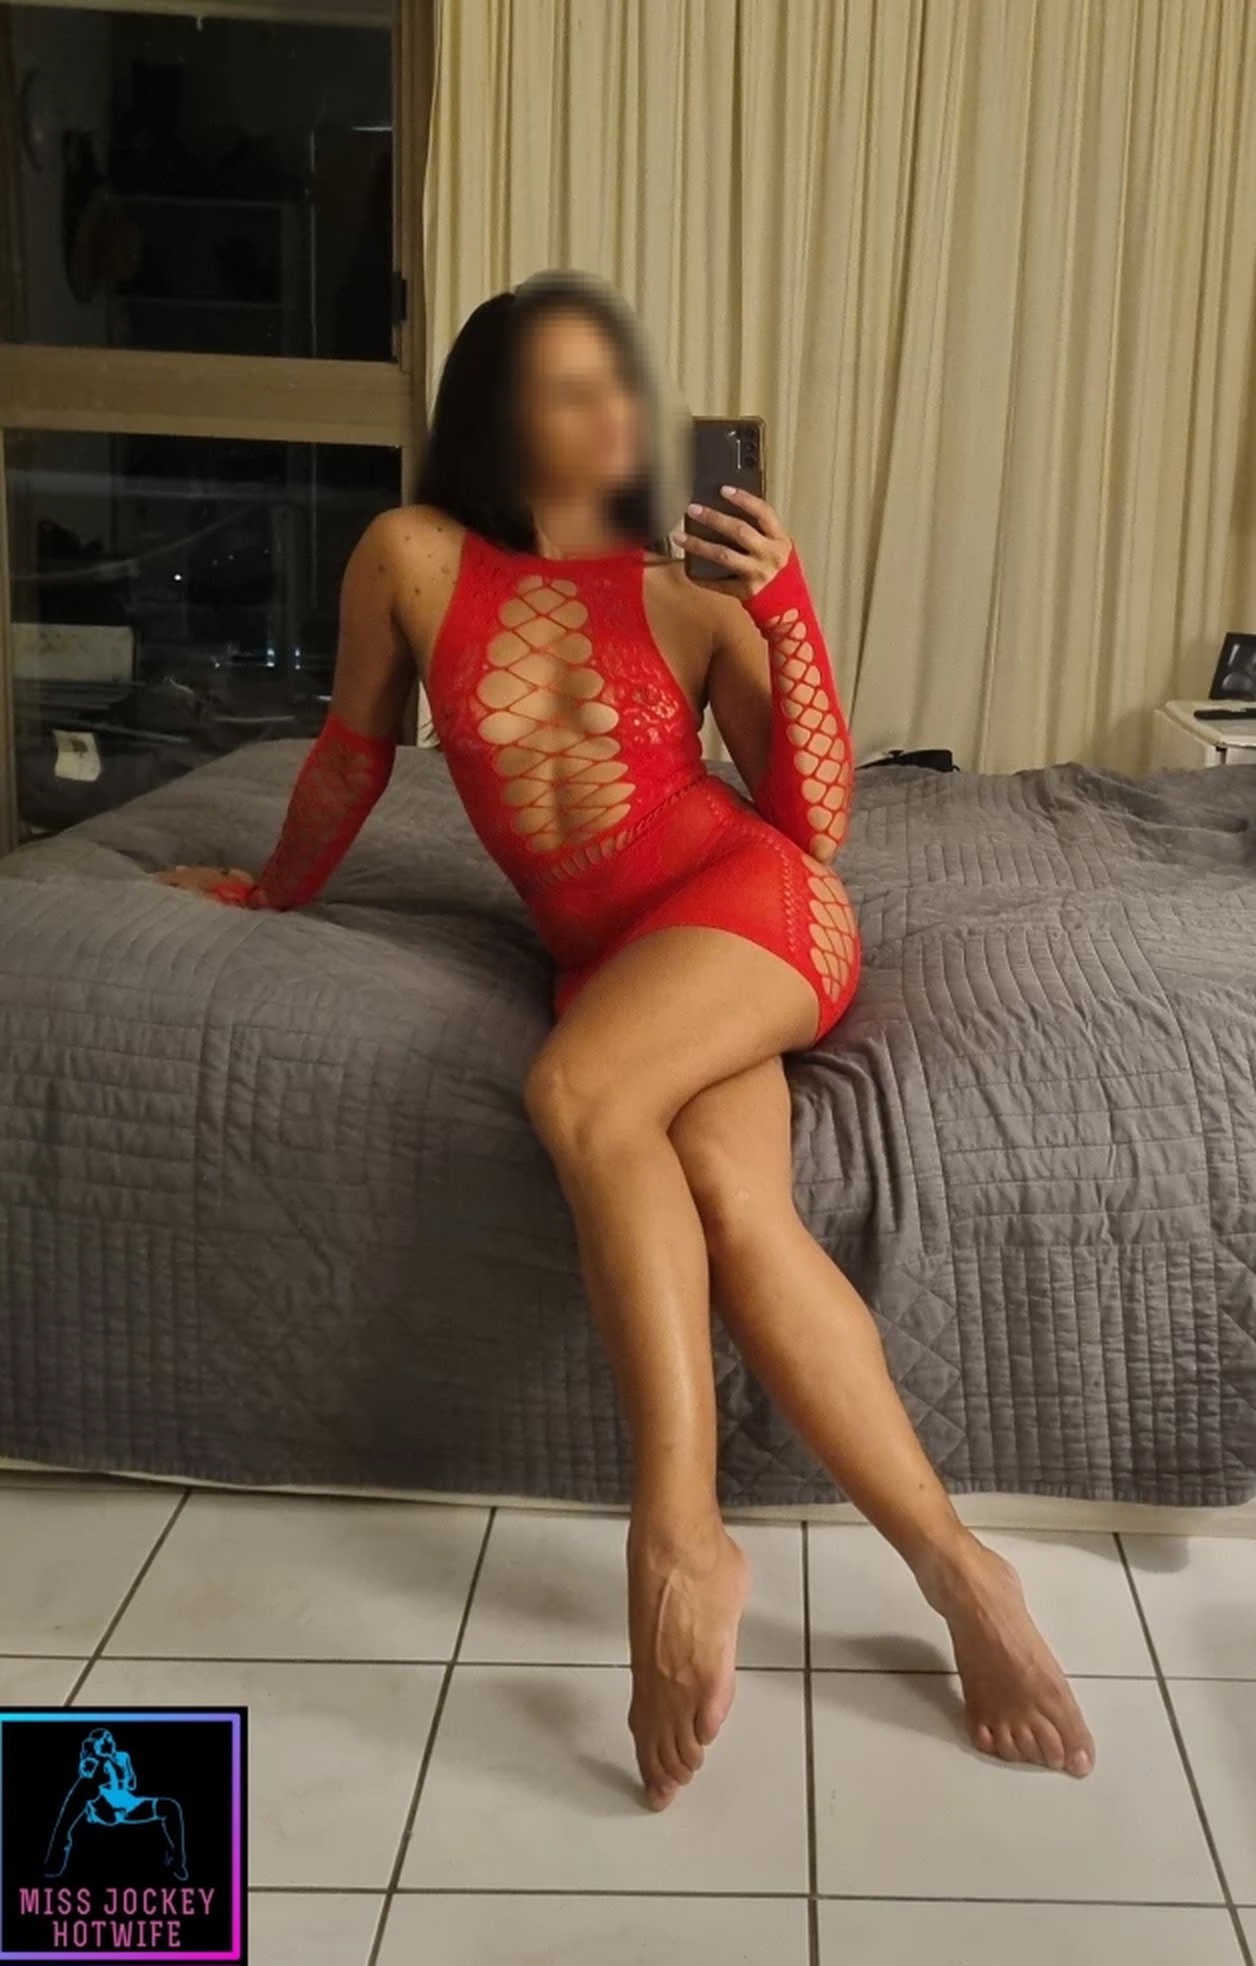 Photo by MissJockeyHotwife with the username @MissJockeyHotwife, who is a verified user,  April 4, 2024 at 1:52 PM. The post is about the topic Hotwife Fantasies and the text says 'It's been a while since I've been naughty 😏 any suggestions on my next clip....😈💦'